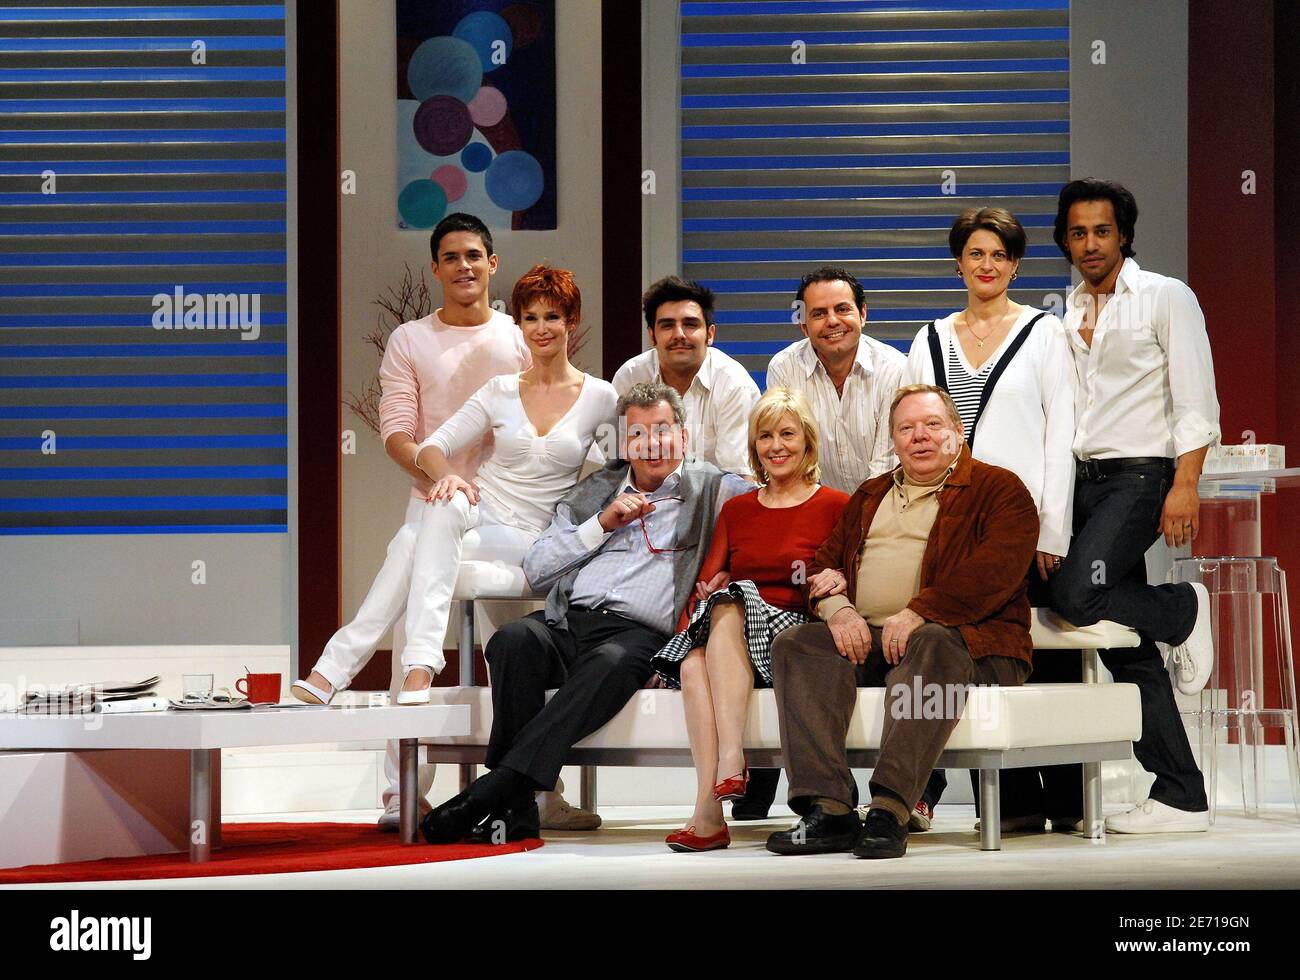 Cast Members (from L to R) Edouard Collin, Marie Sophie L., autor Jean-Marie Chevret, Frederic Santos, Chantal Ladesou, Director Jean-Pierre Dravel and Olivier Mace, Sonia Dubois and Olivier Benard pose at the end of Jean-Marie Chevret's play 'Les Amazones, 3 ans apres' at the Theatre de La Rennaissance, in Paris, France, on January 22, 2007. Photo by Christophe Guibbaud/ABACAPRESS.COM Stock Photo